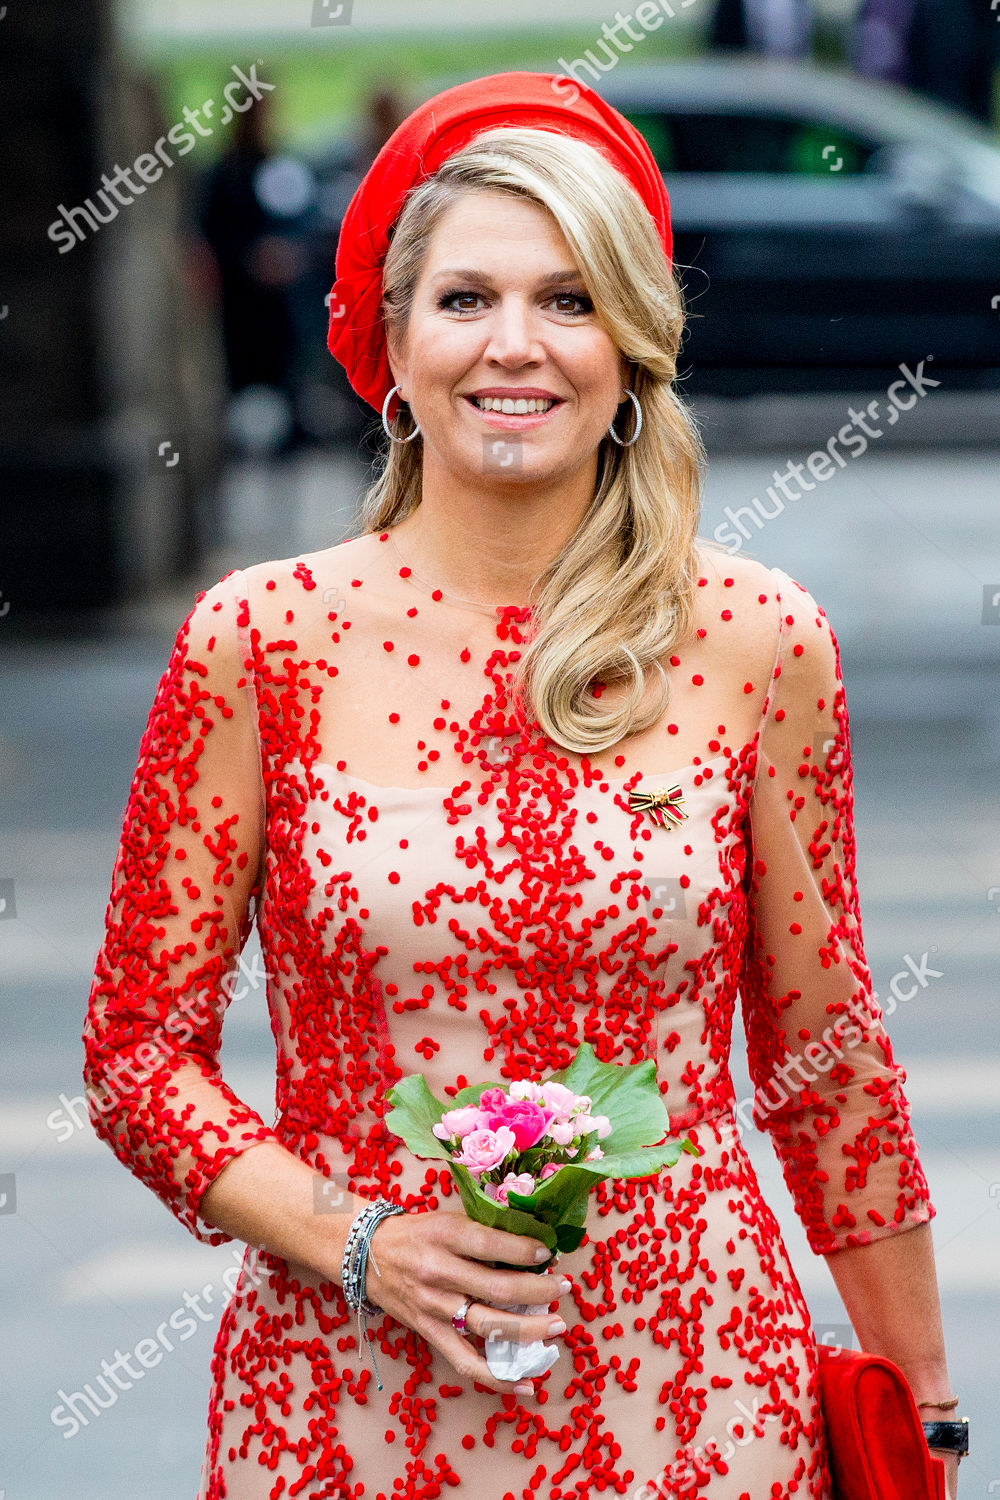 king-willem-alexander-and-queen-maxima-visit-to-germany-shutterstock-editorial-9922672i.jpg